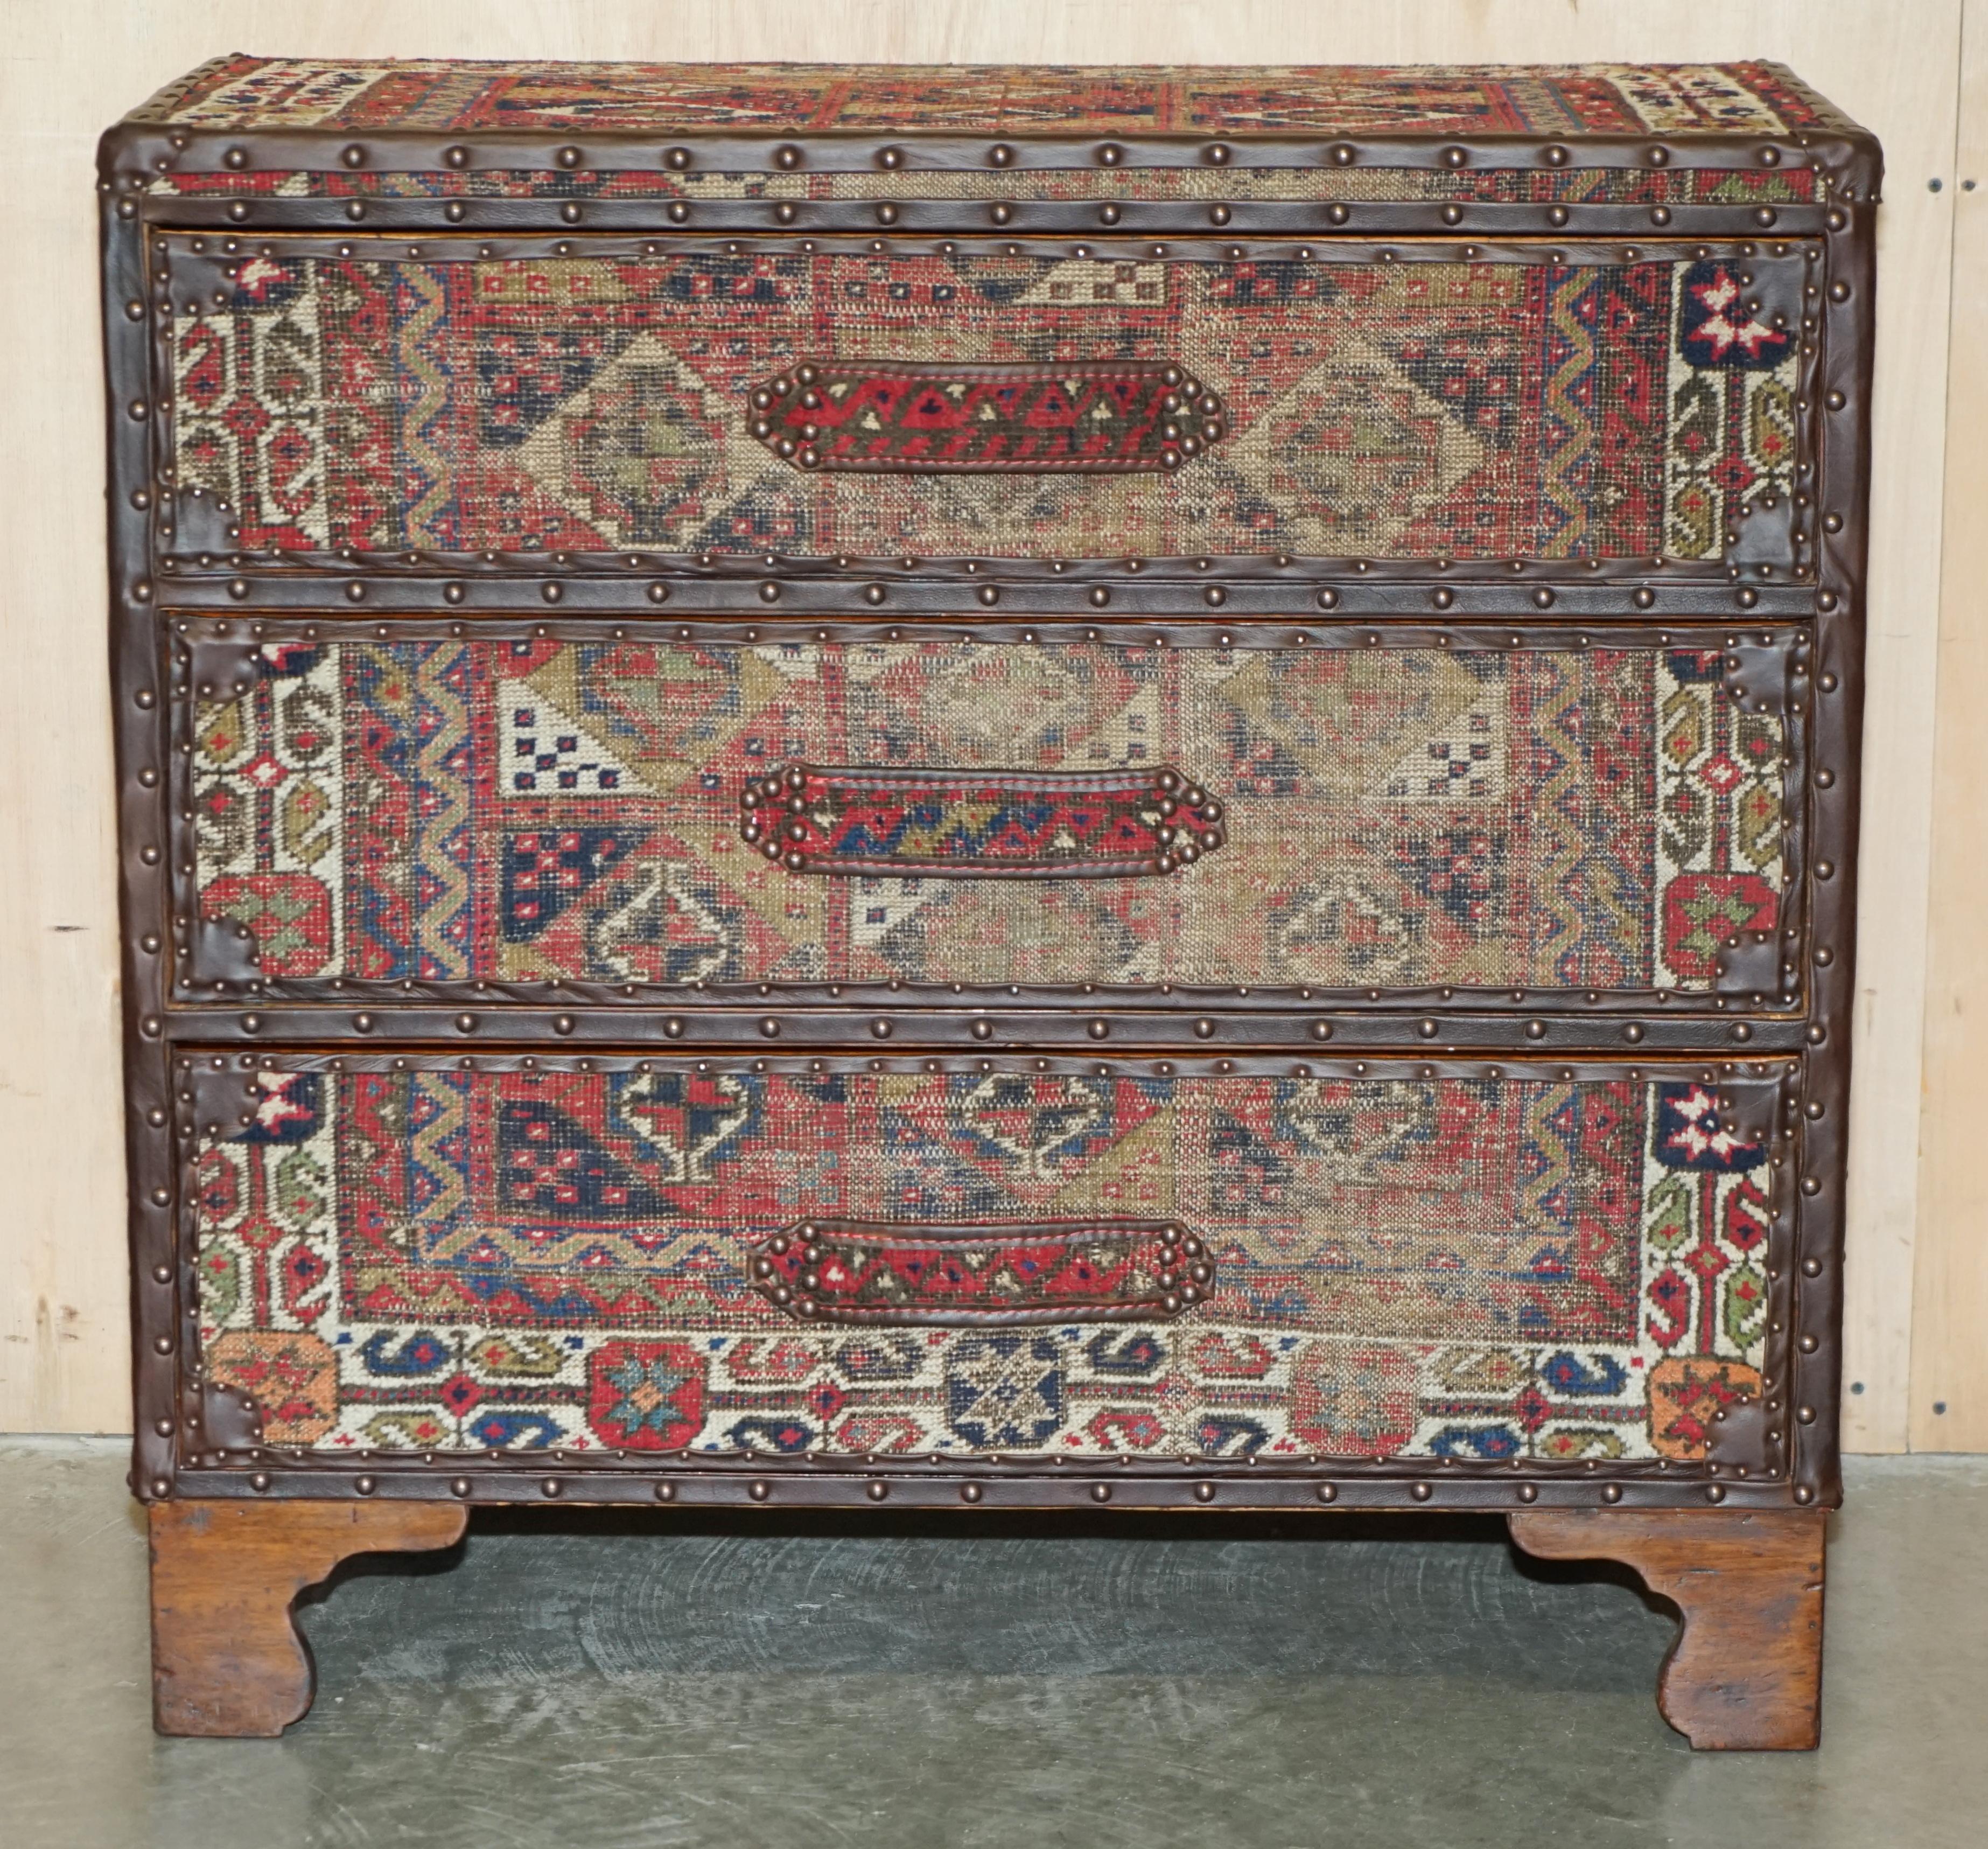 ViNTAGE KILIM & BROWN LEATHER CHEST OF DRAWERS FINISHED WITH ANTIQUE PIN NAILs (Viktorianisch) im Angebot